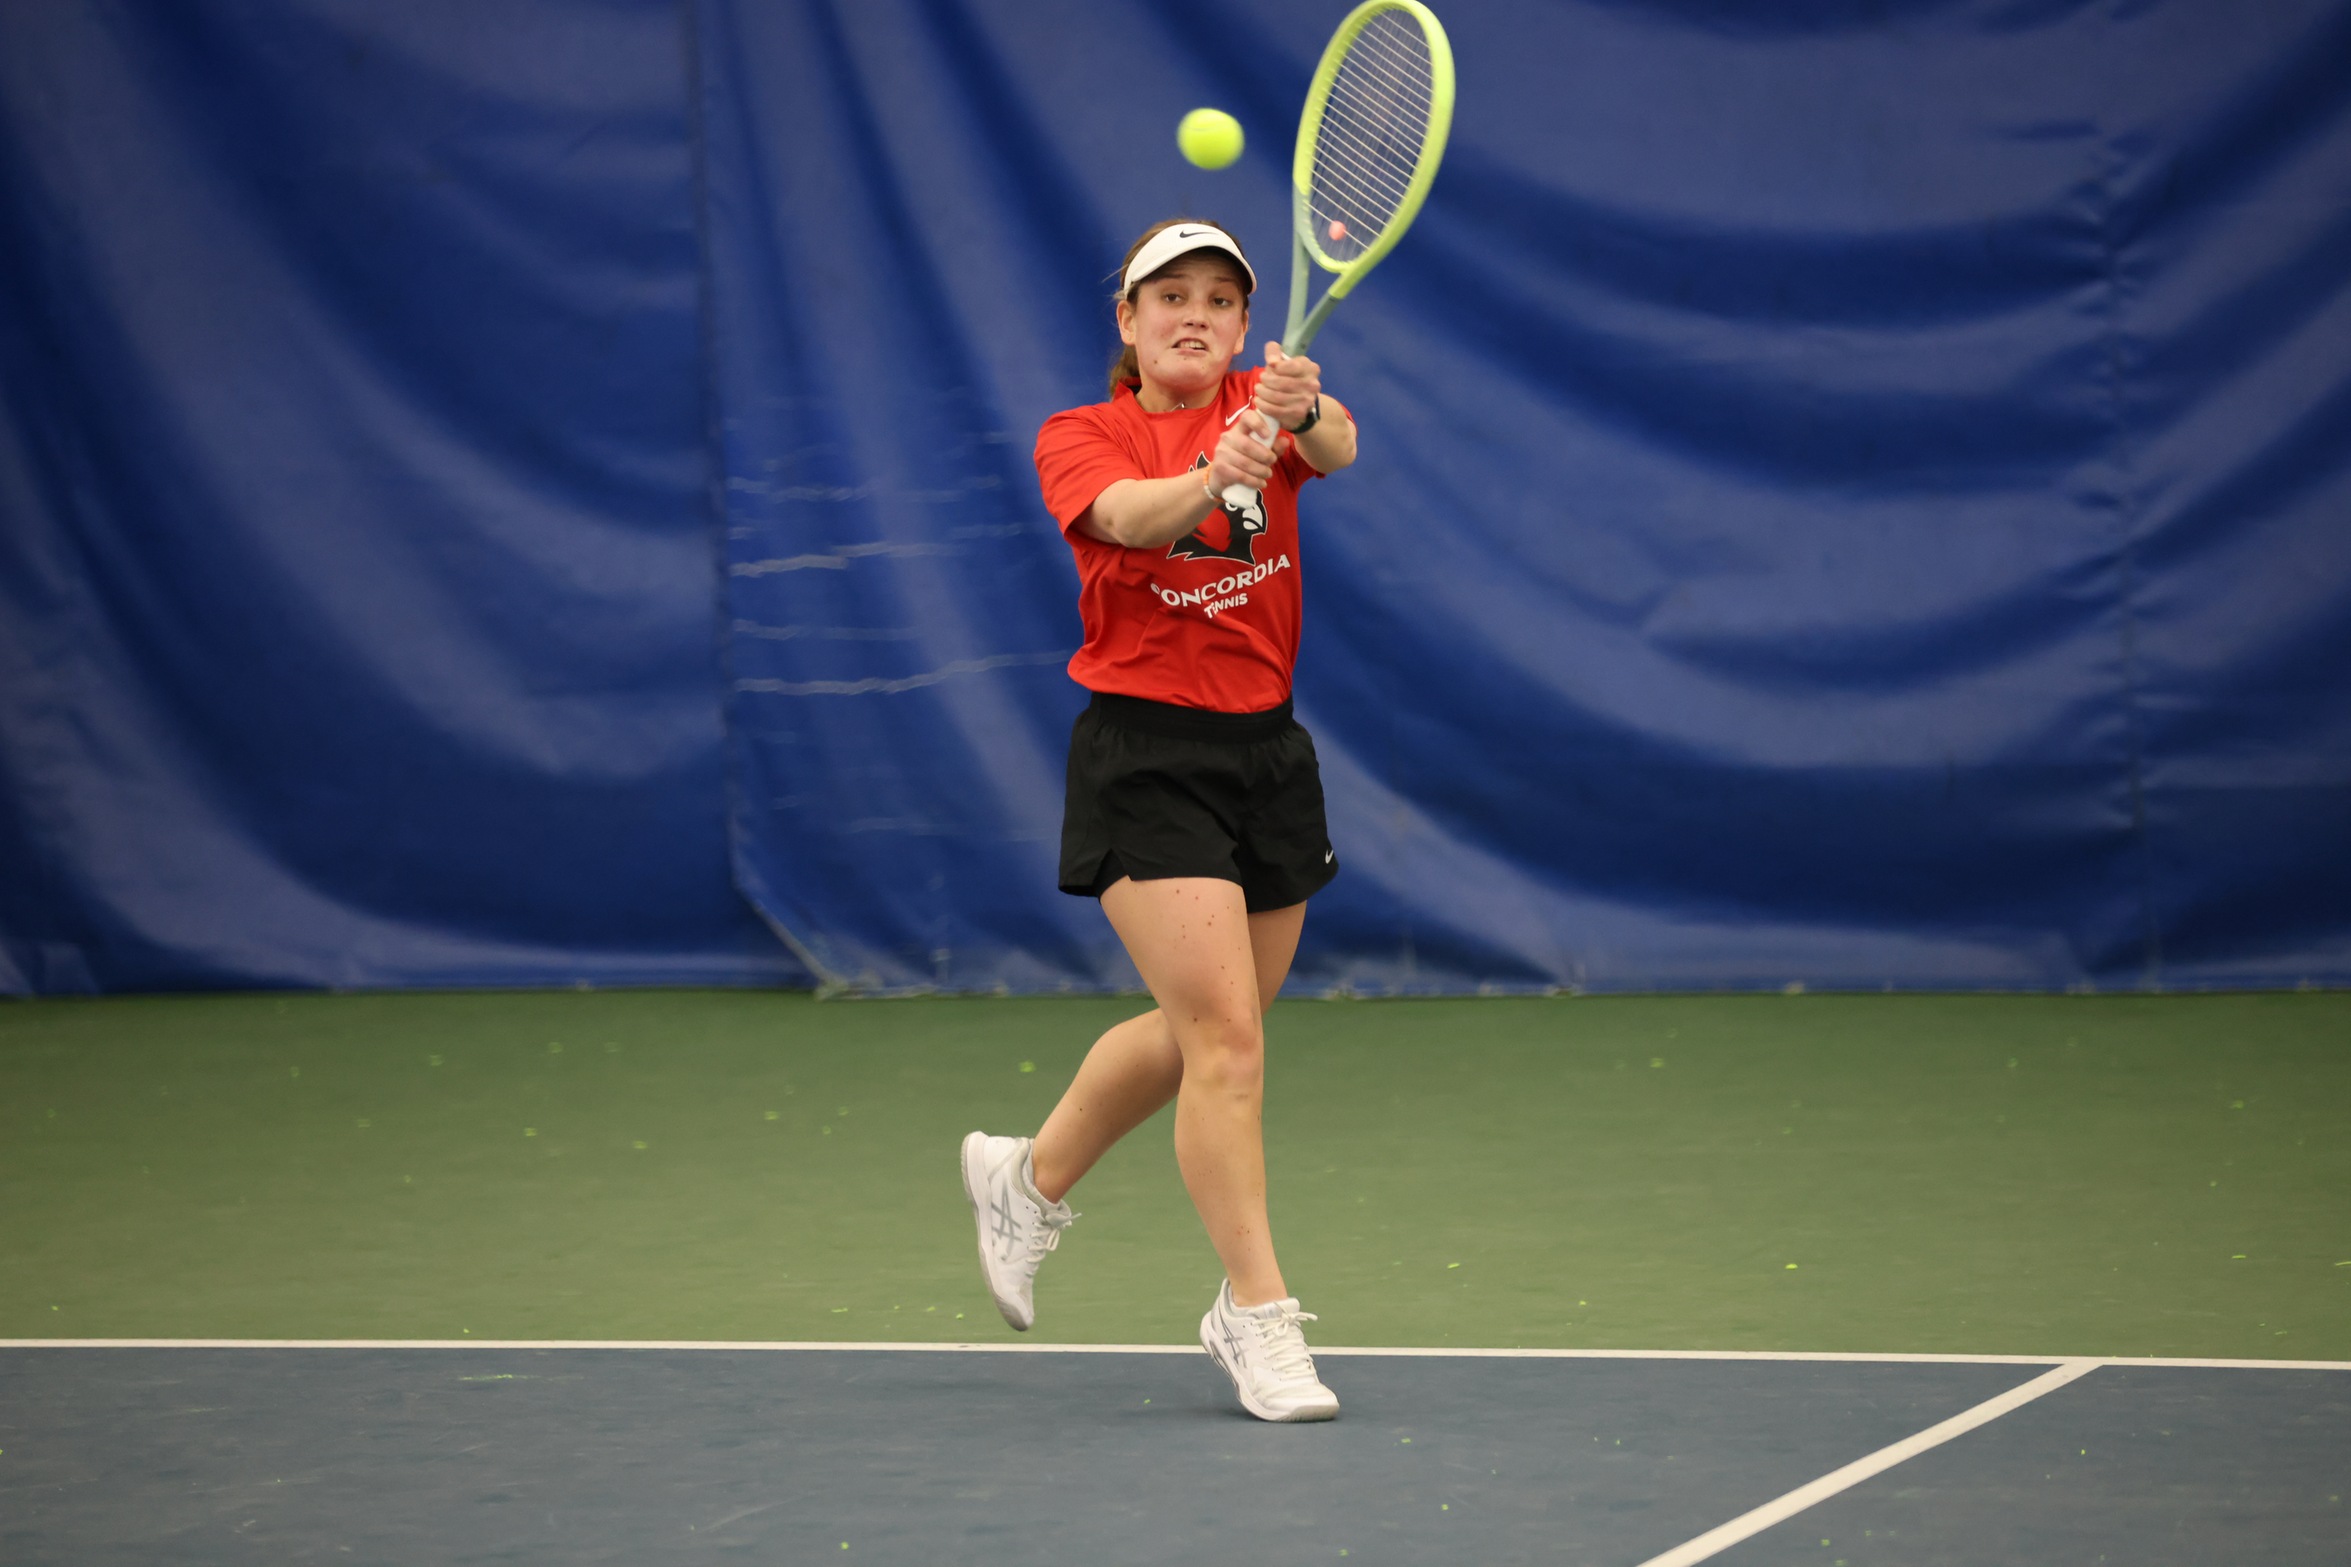 Women's Tennis wraps up season with 6-1 win against the Comets